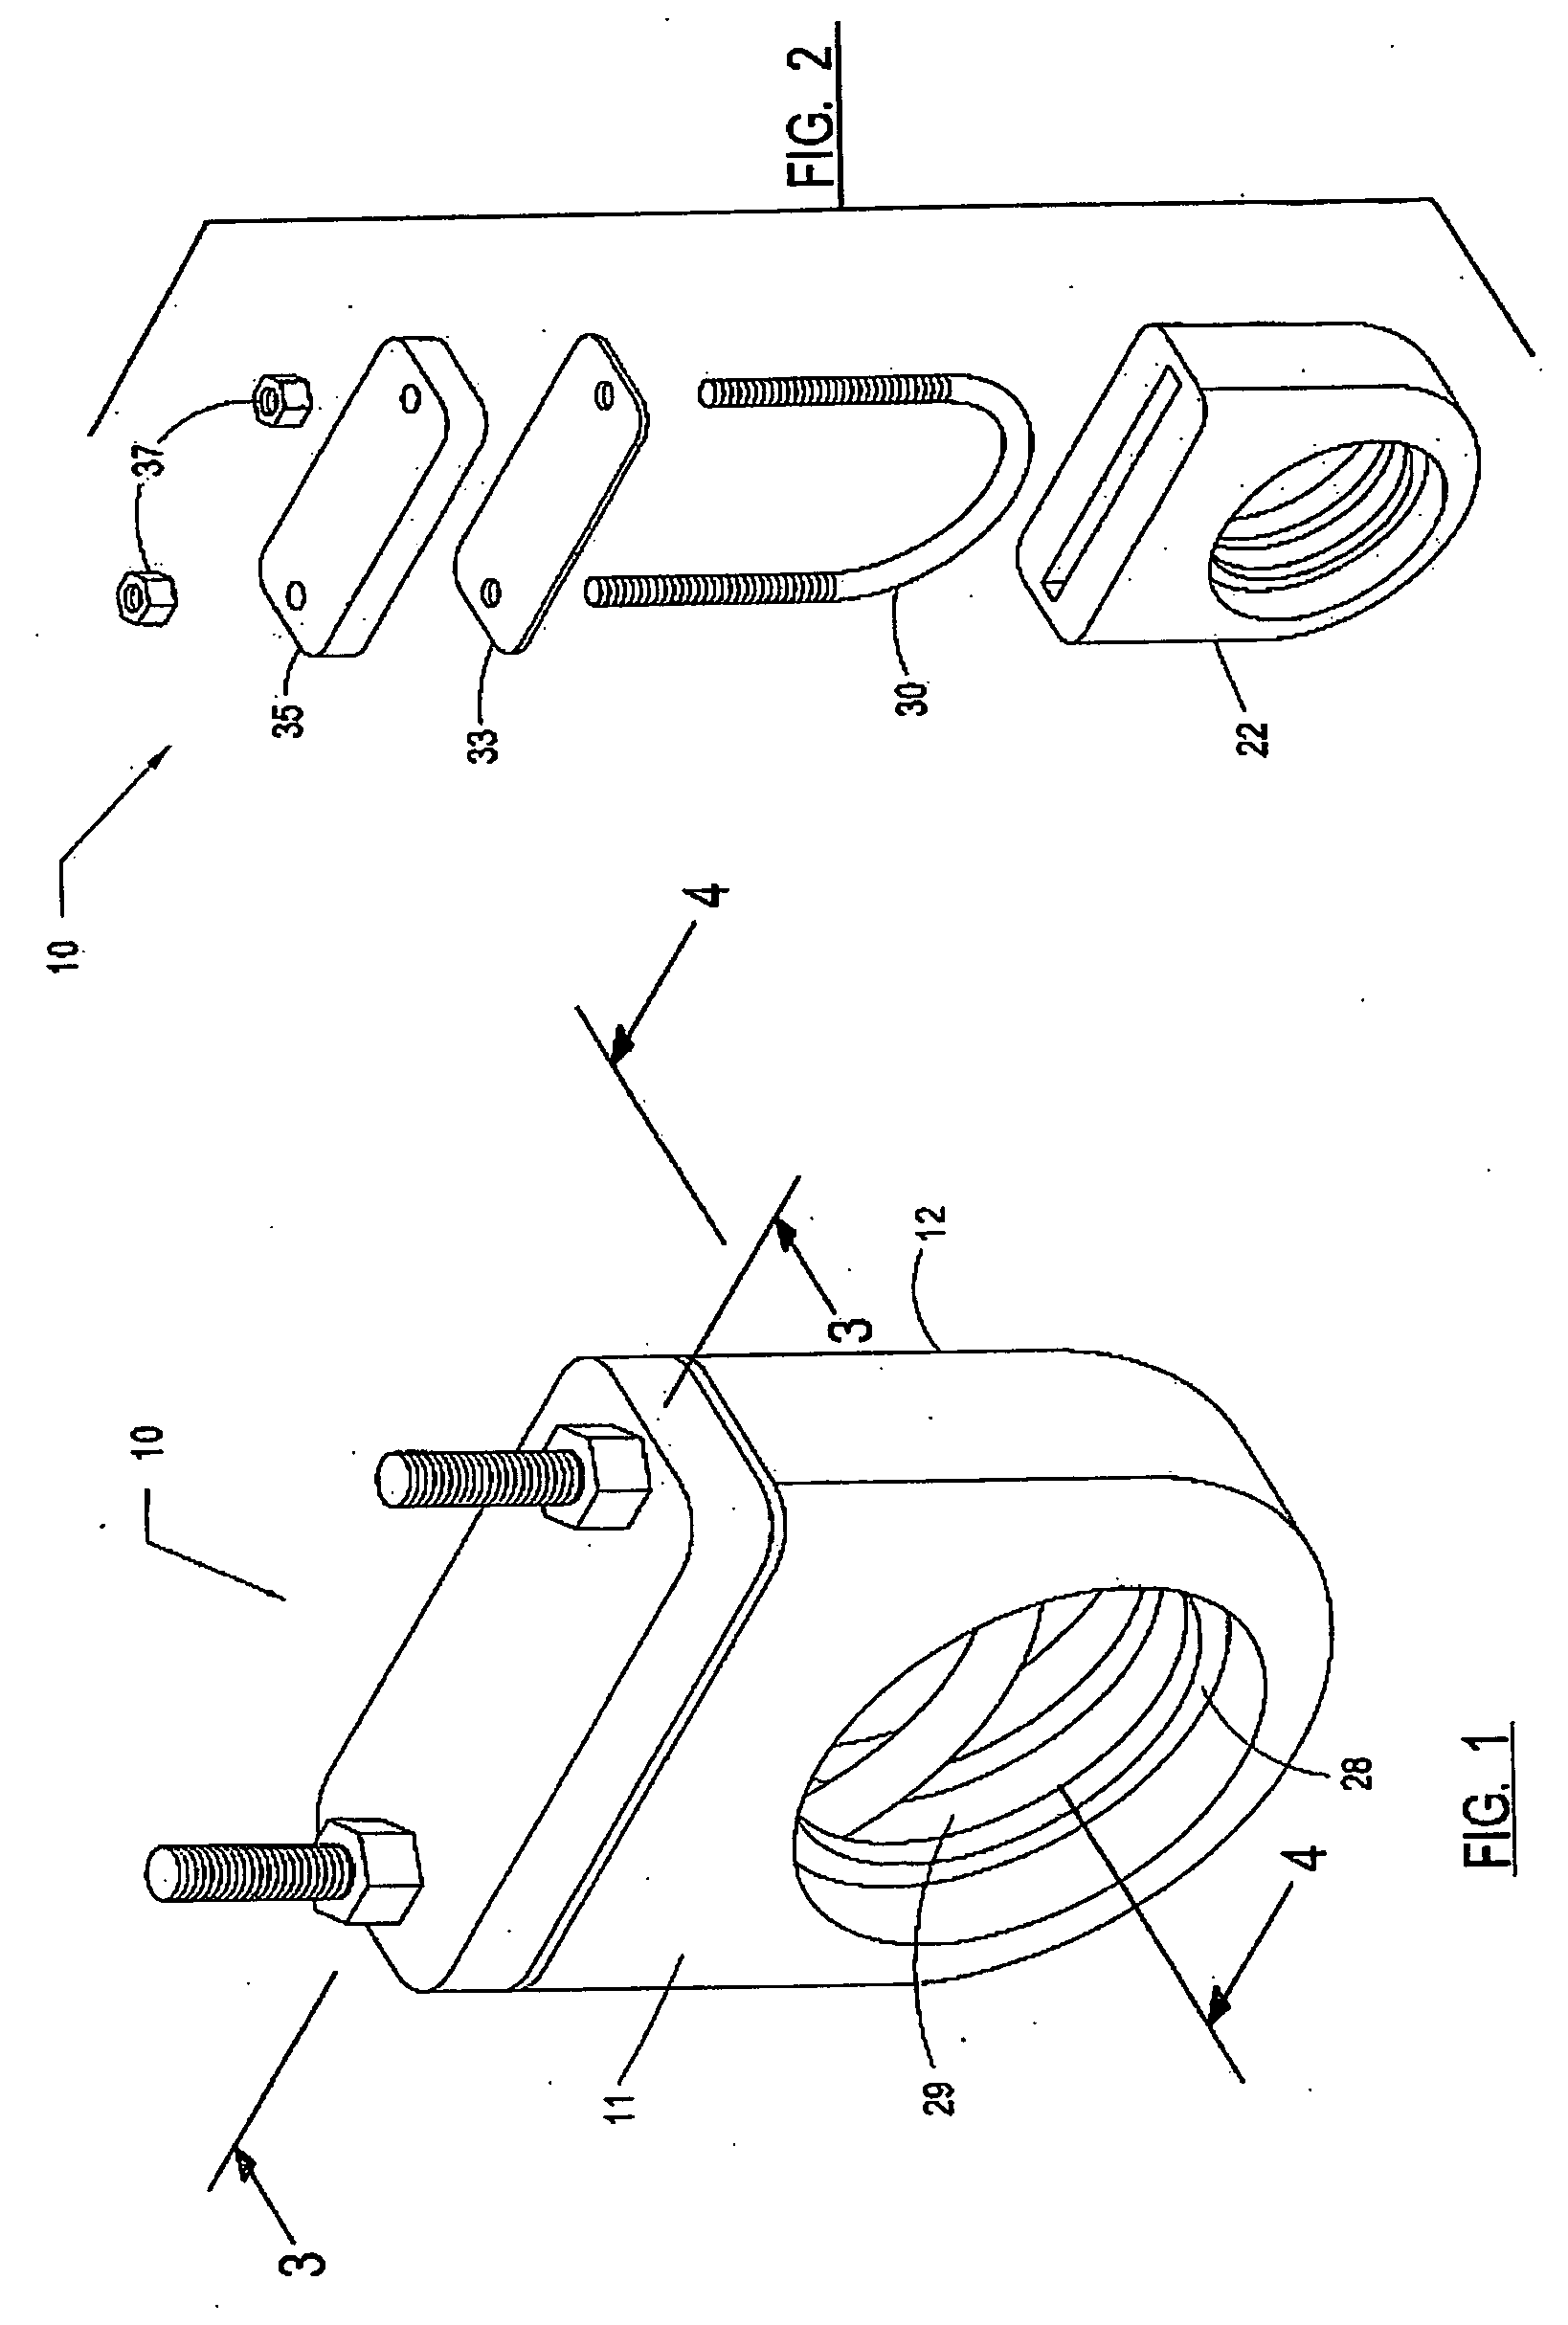 Apparatuses, systems, and methods for inhibiting the removal of cable from conduit